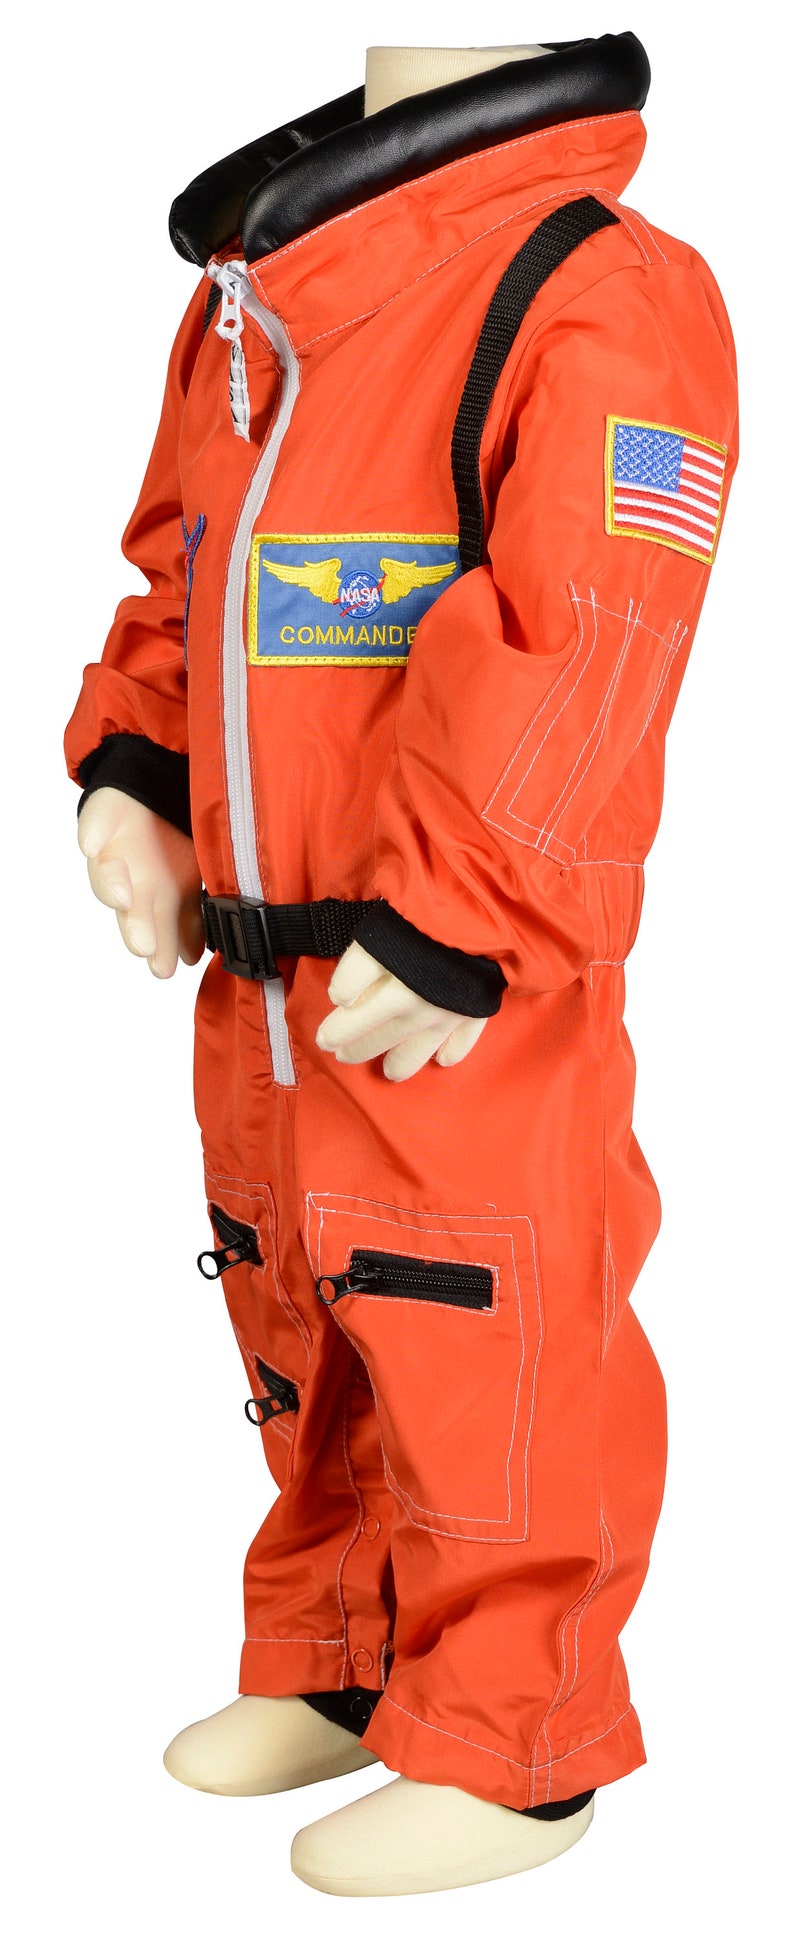 Personalised NASA Astronaut Costume with Cap-In White & Orange-NASA Logo-USA Flag Space Shuttle and Commander Patch-Realistic image 8